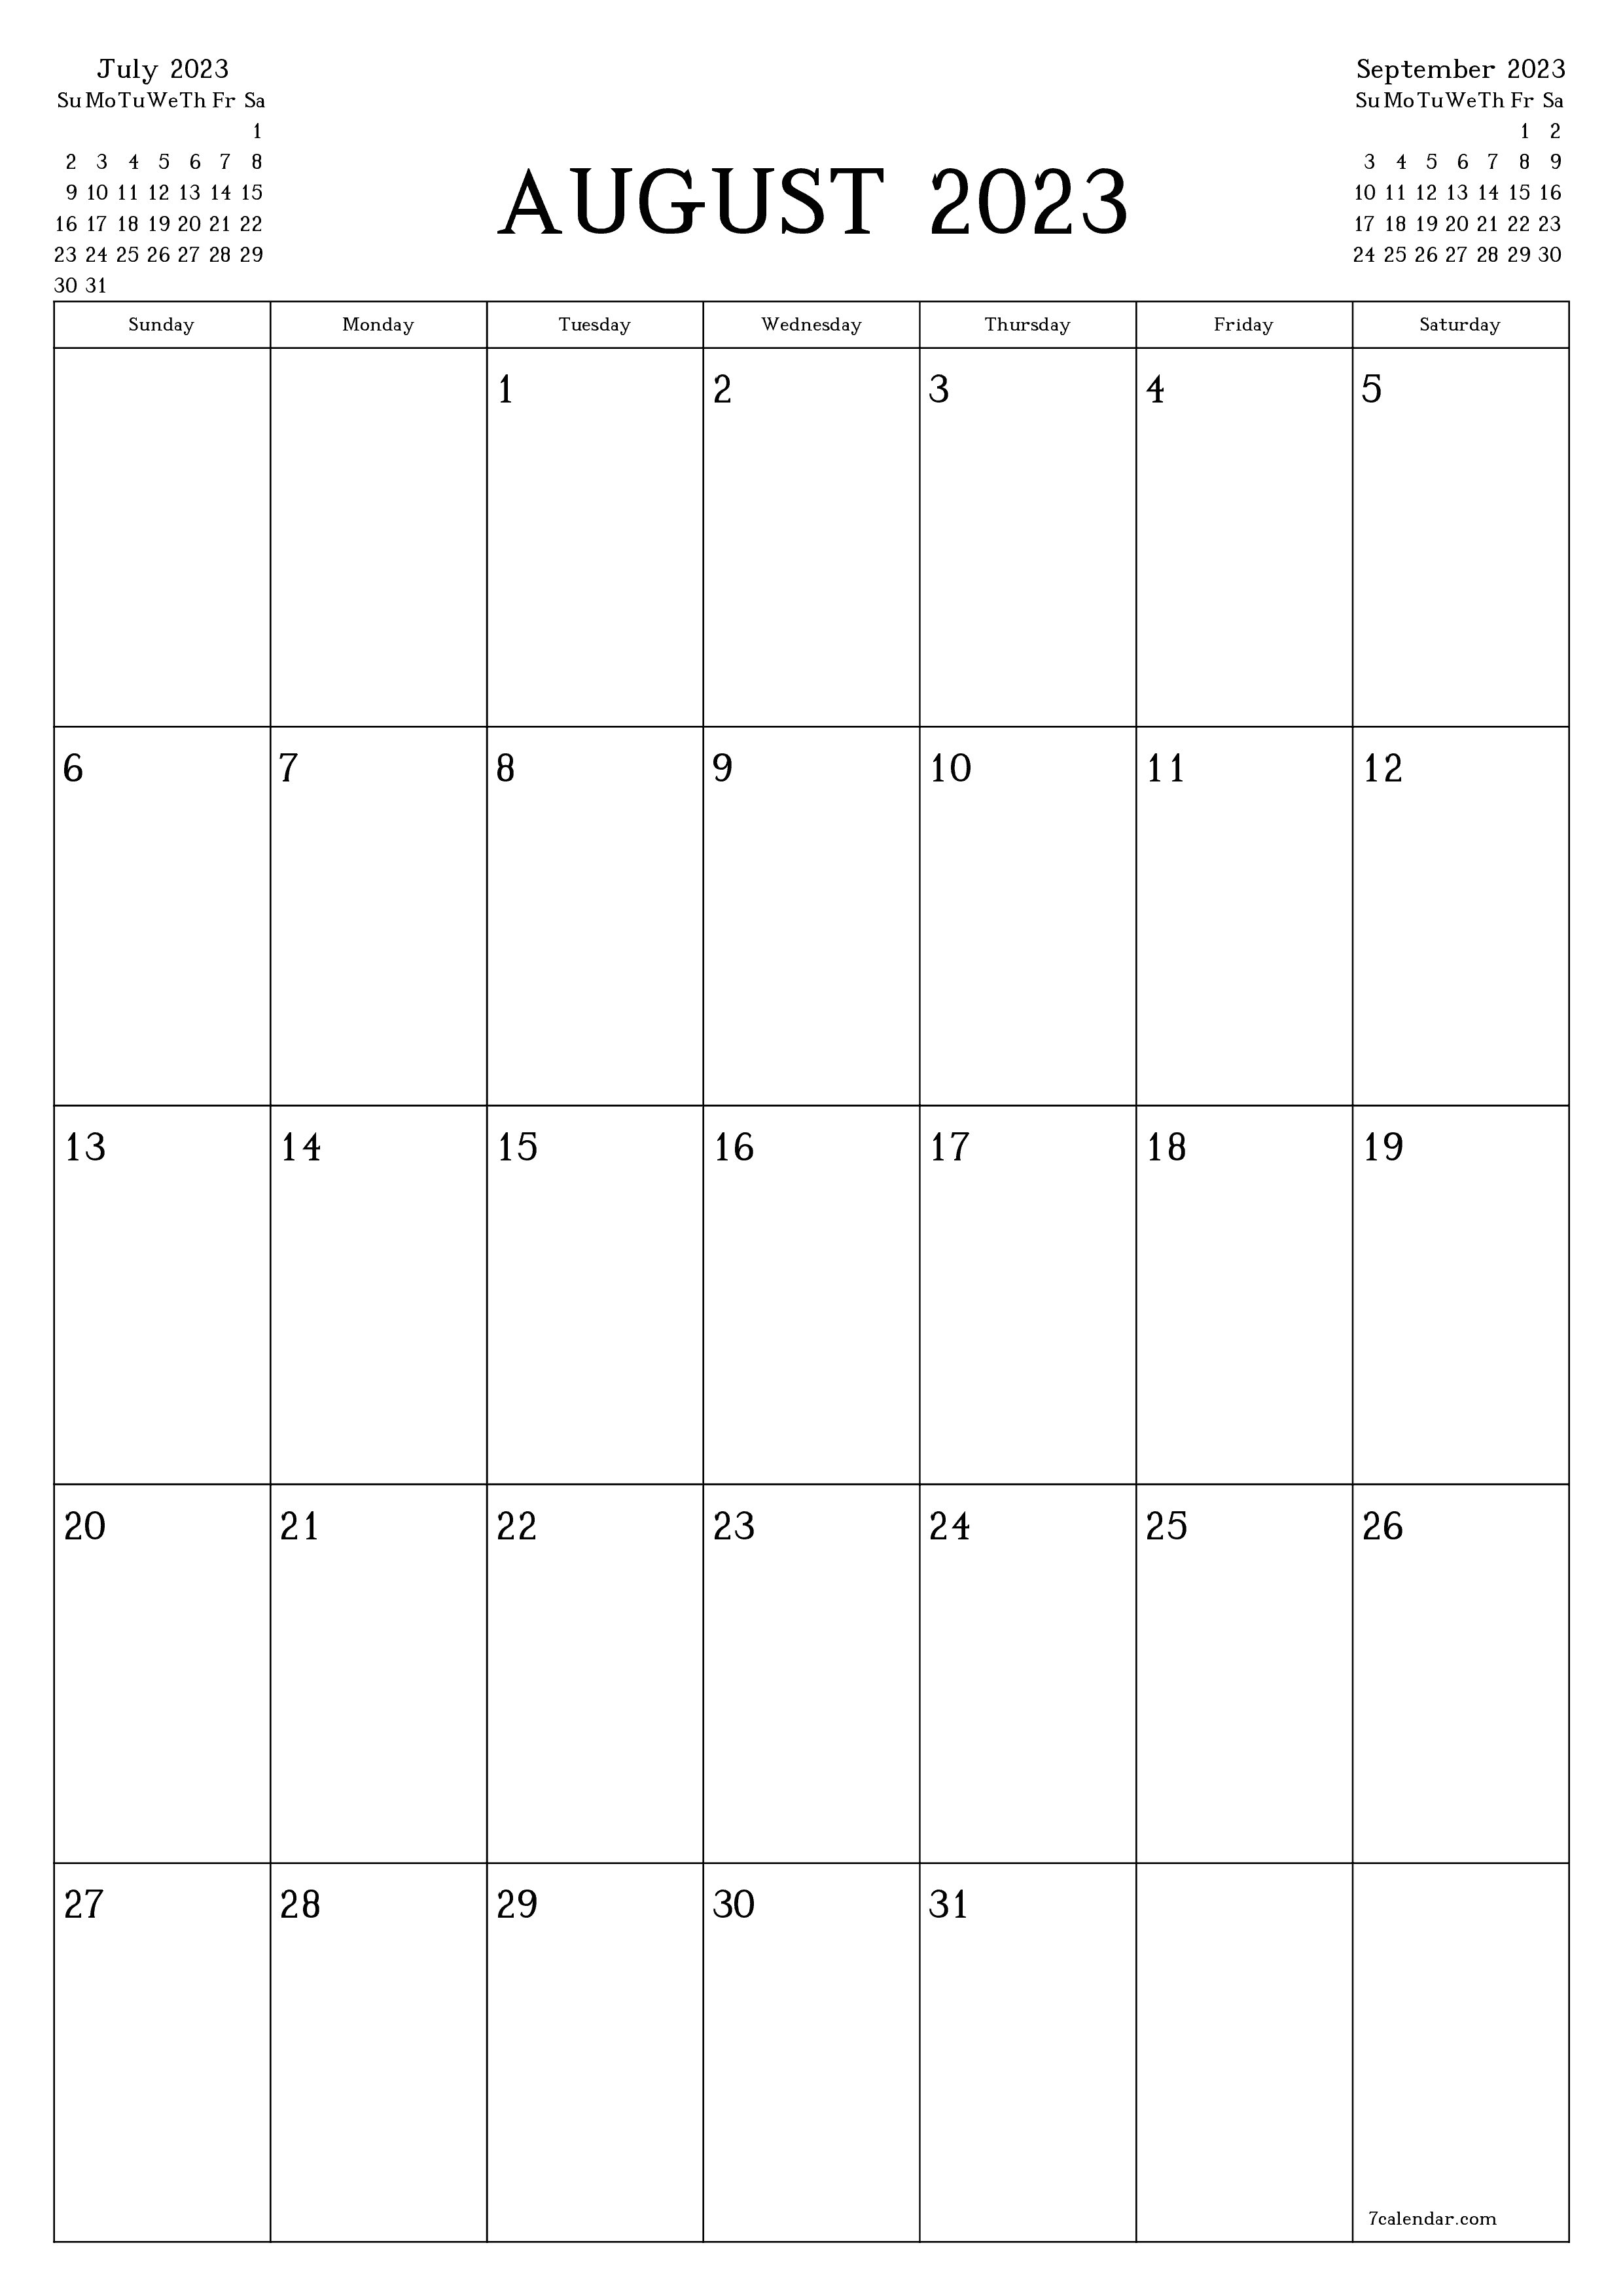 Blank monthly printable calendar and planner for month August 2023 with notes save and print to PDF PNG English - 7calendar.com